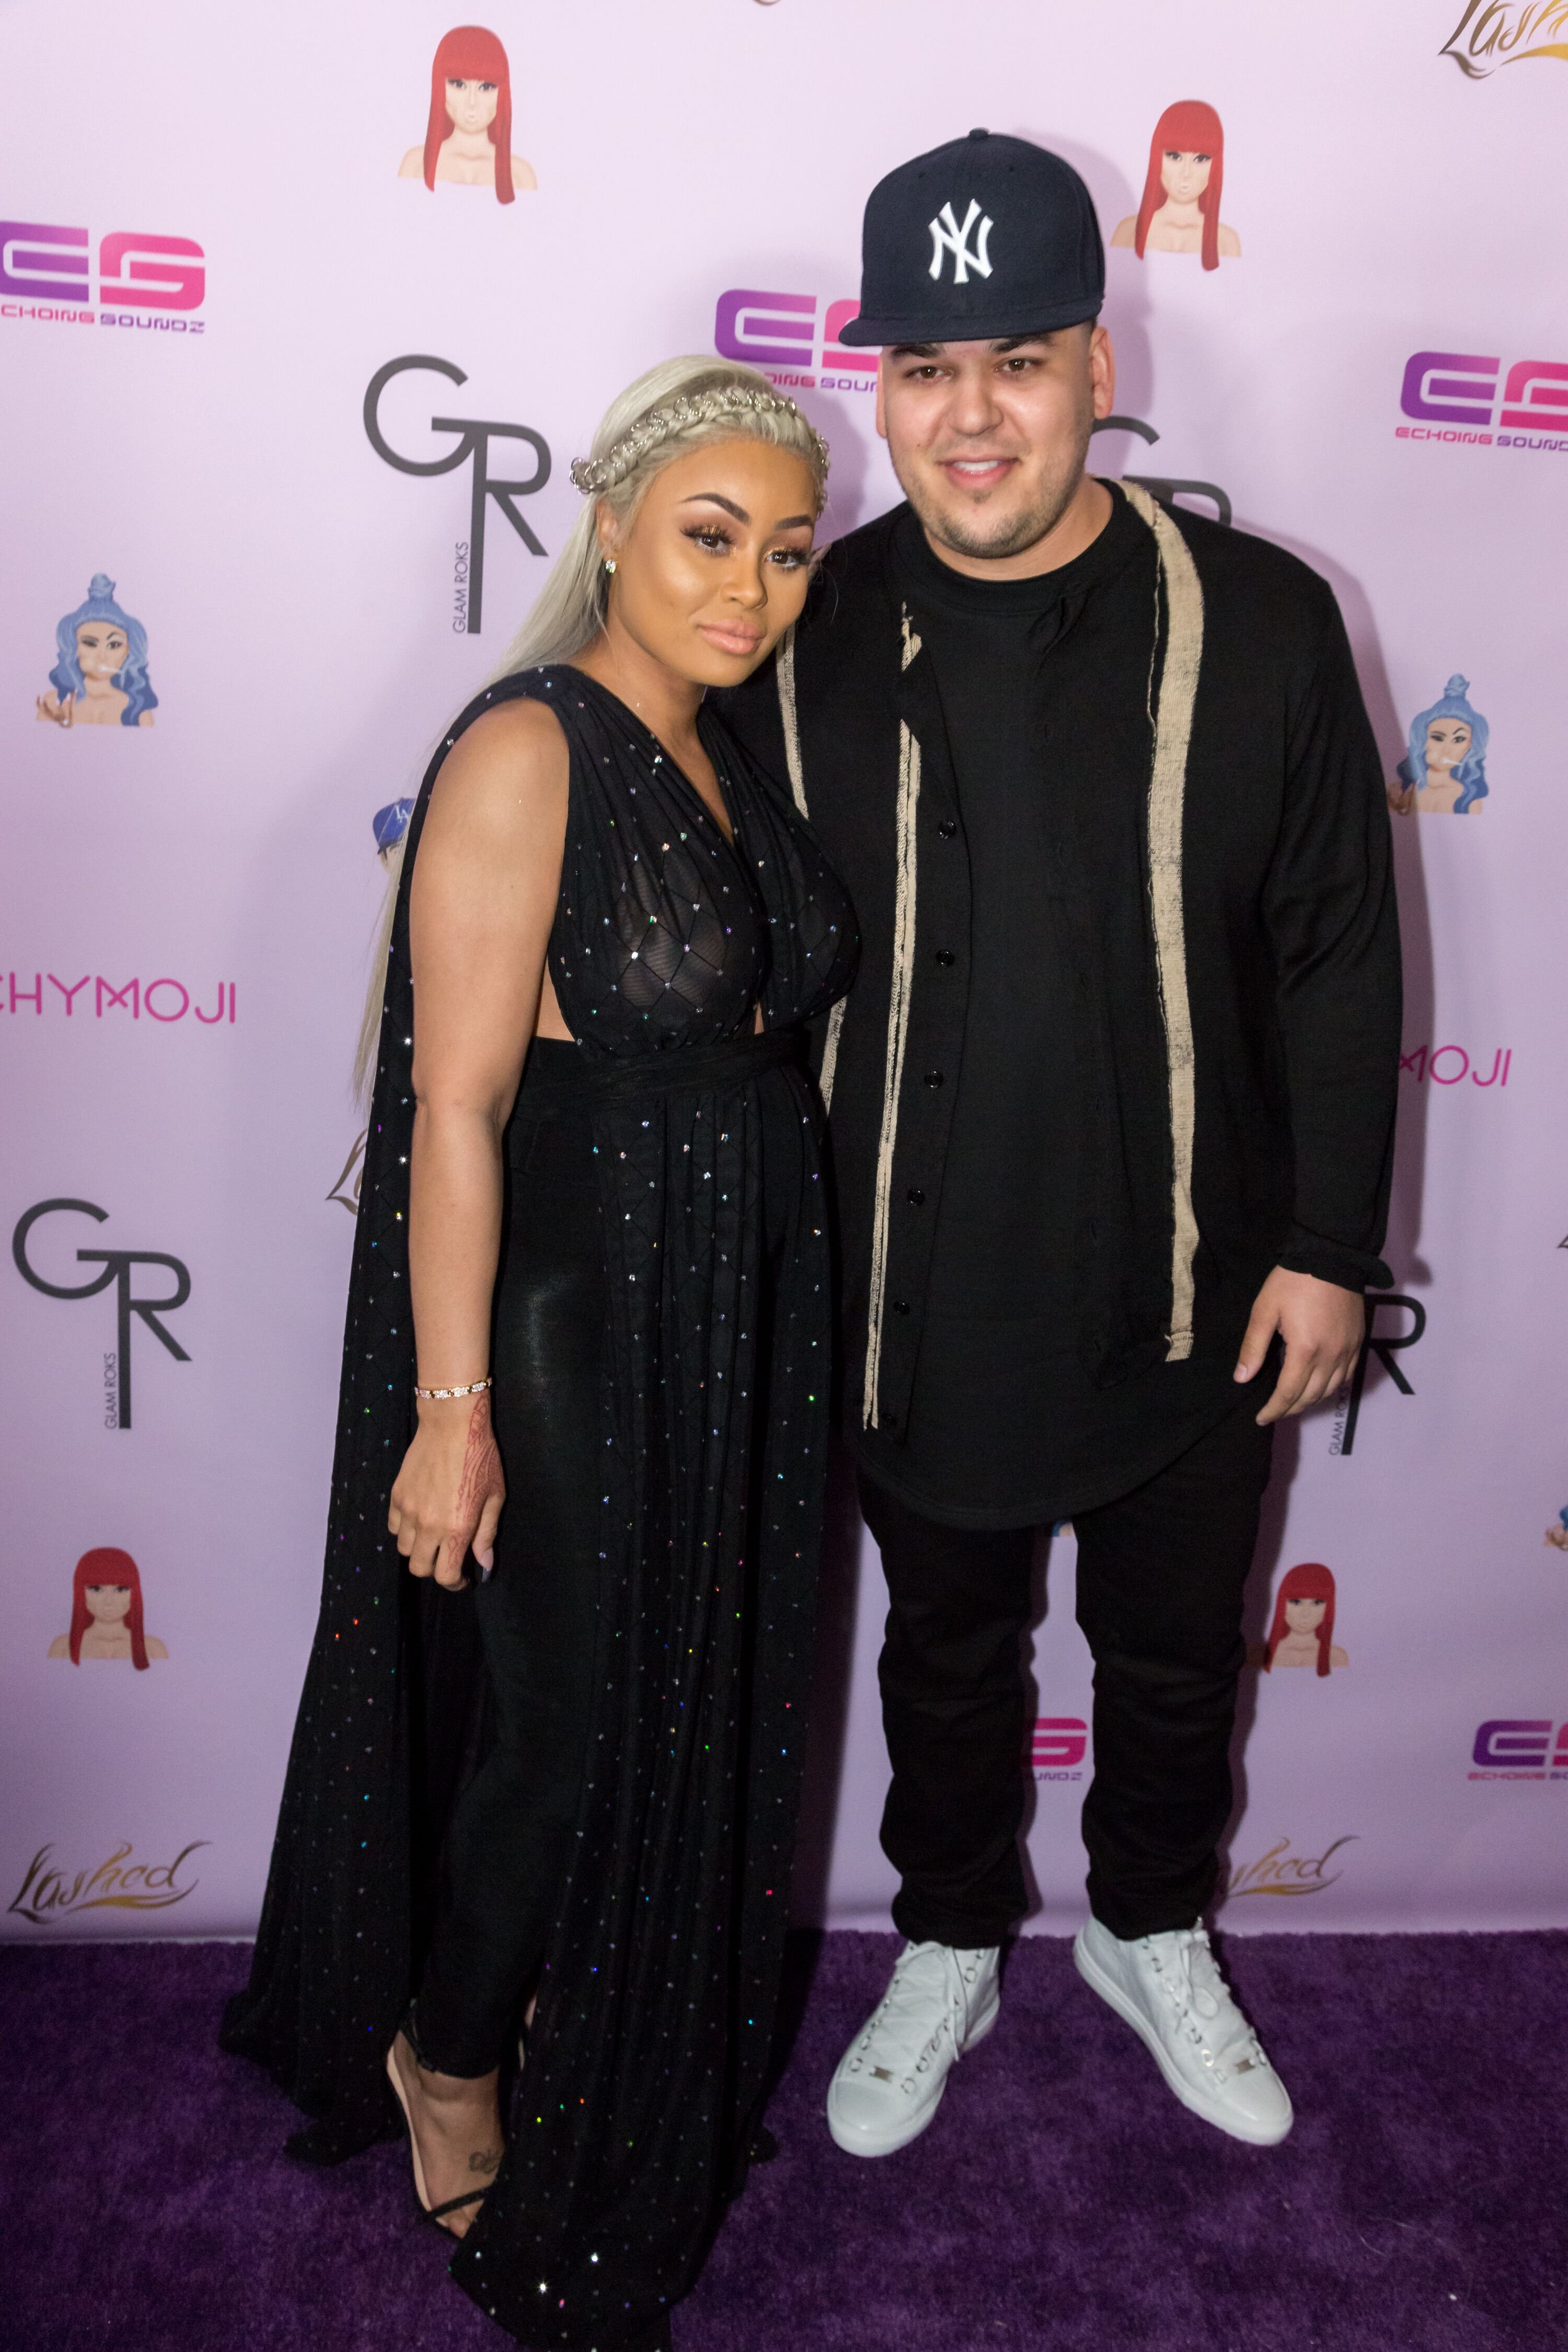 Rob Kardashian and Blac Chyna arrive at her Blac Chyna Birthday Celebration And Unveiling Of Her "Chymoji" Emoji Collection at the Hard Rock Cafe on May 10, 2016 in Hollywood, California. | Photo: Getty Images